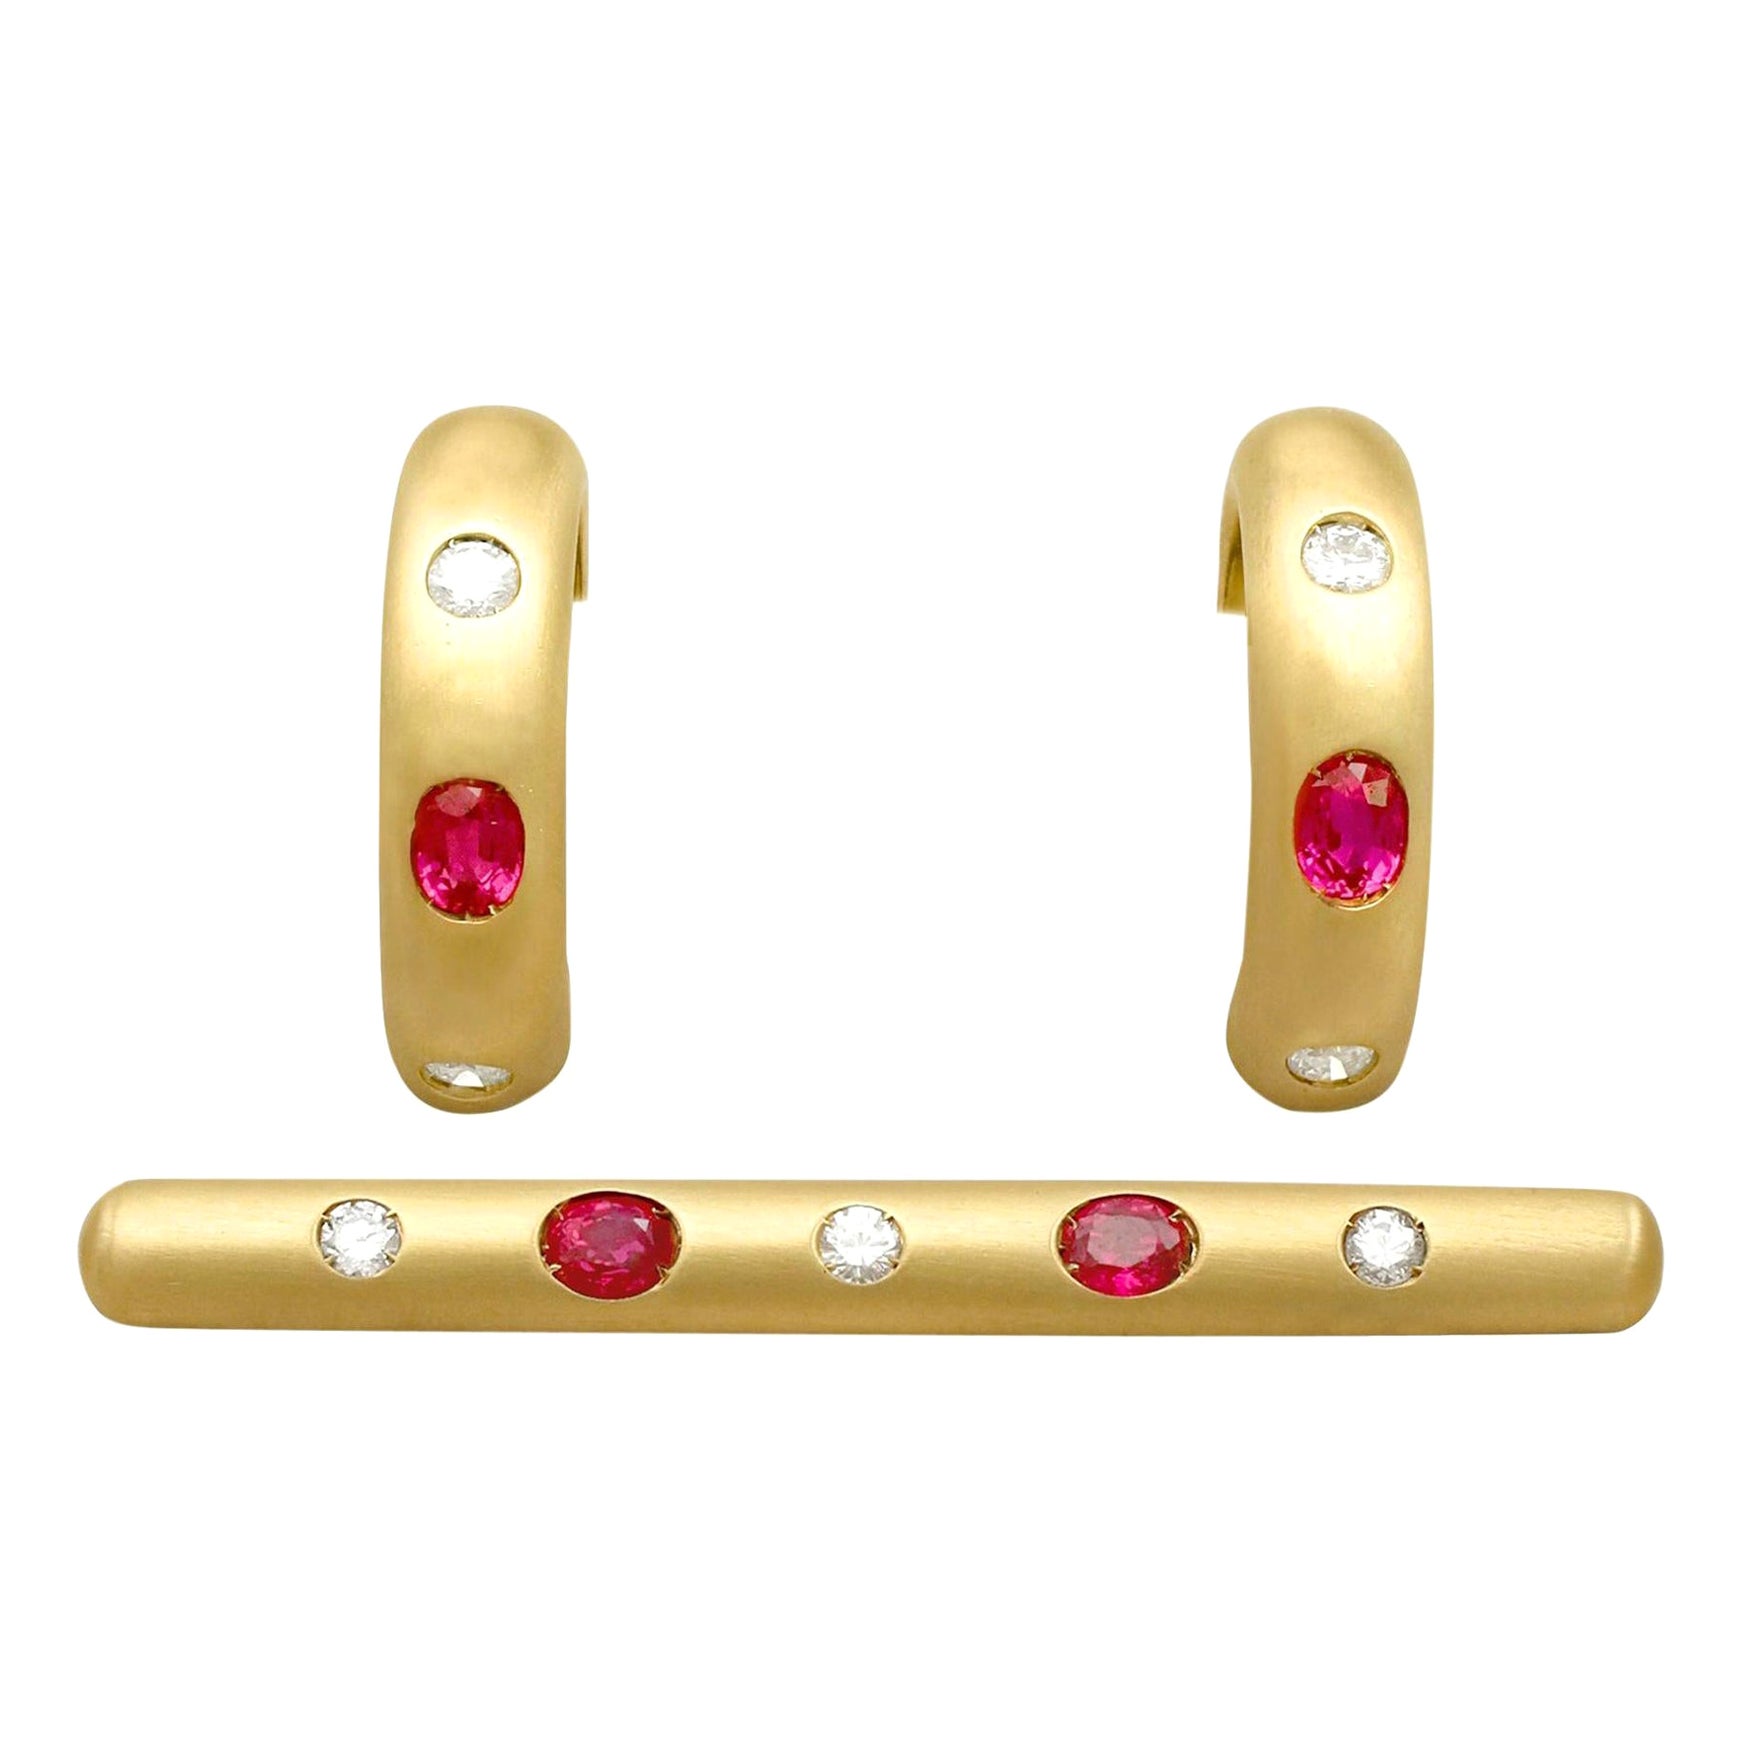 Vintage 1.05 Carat Ruby and Diamond Earring and Brooch Set in Yellow Gold